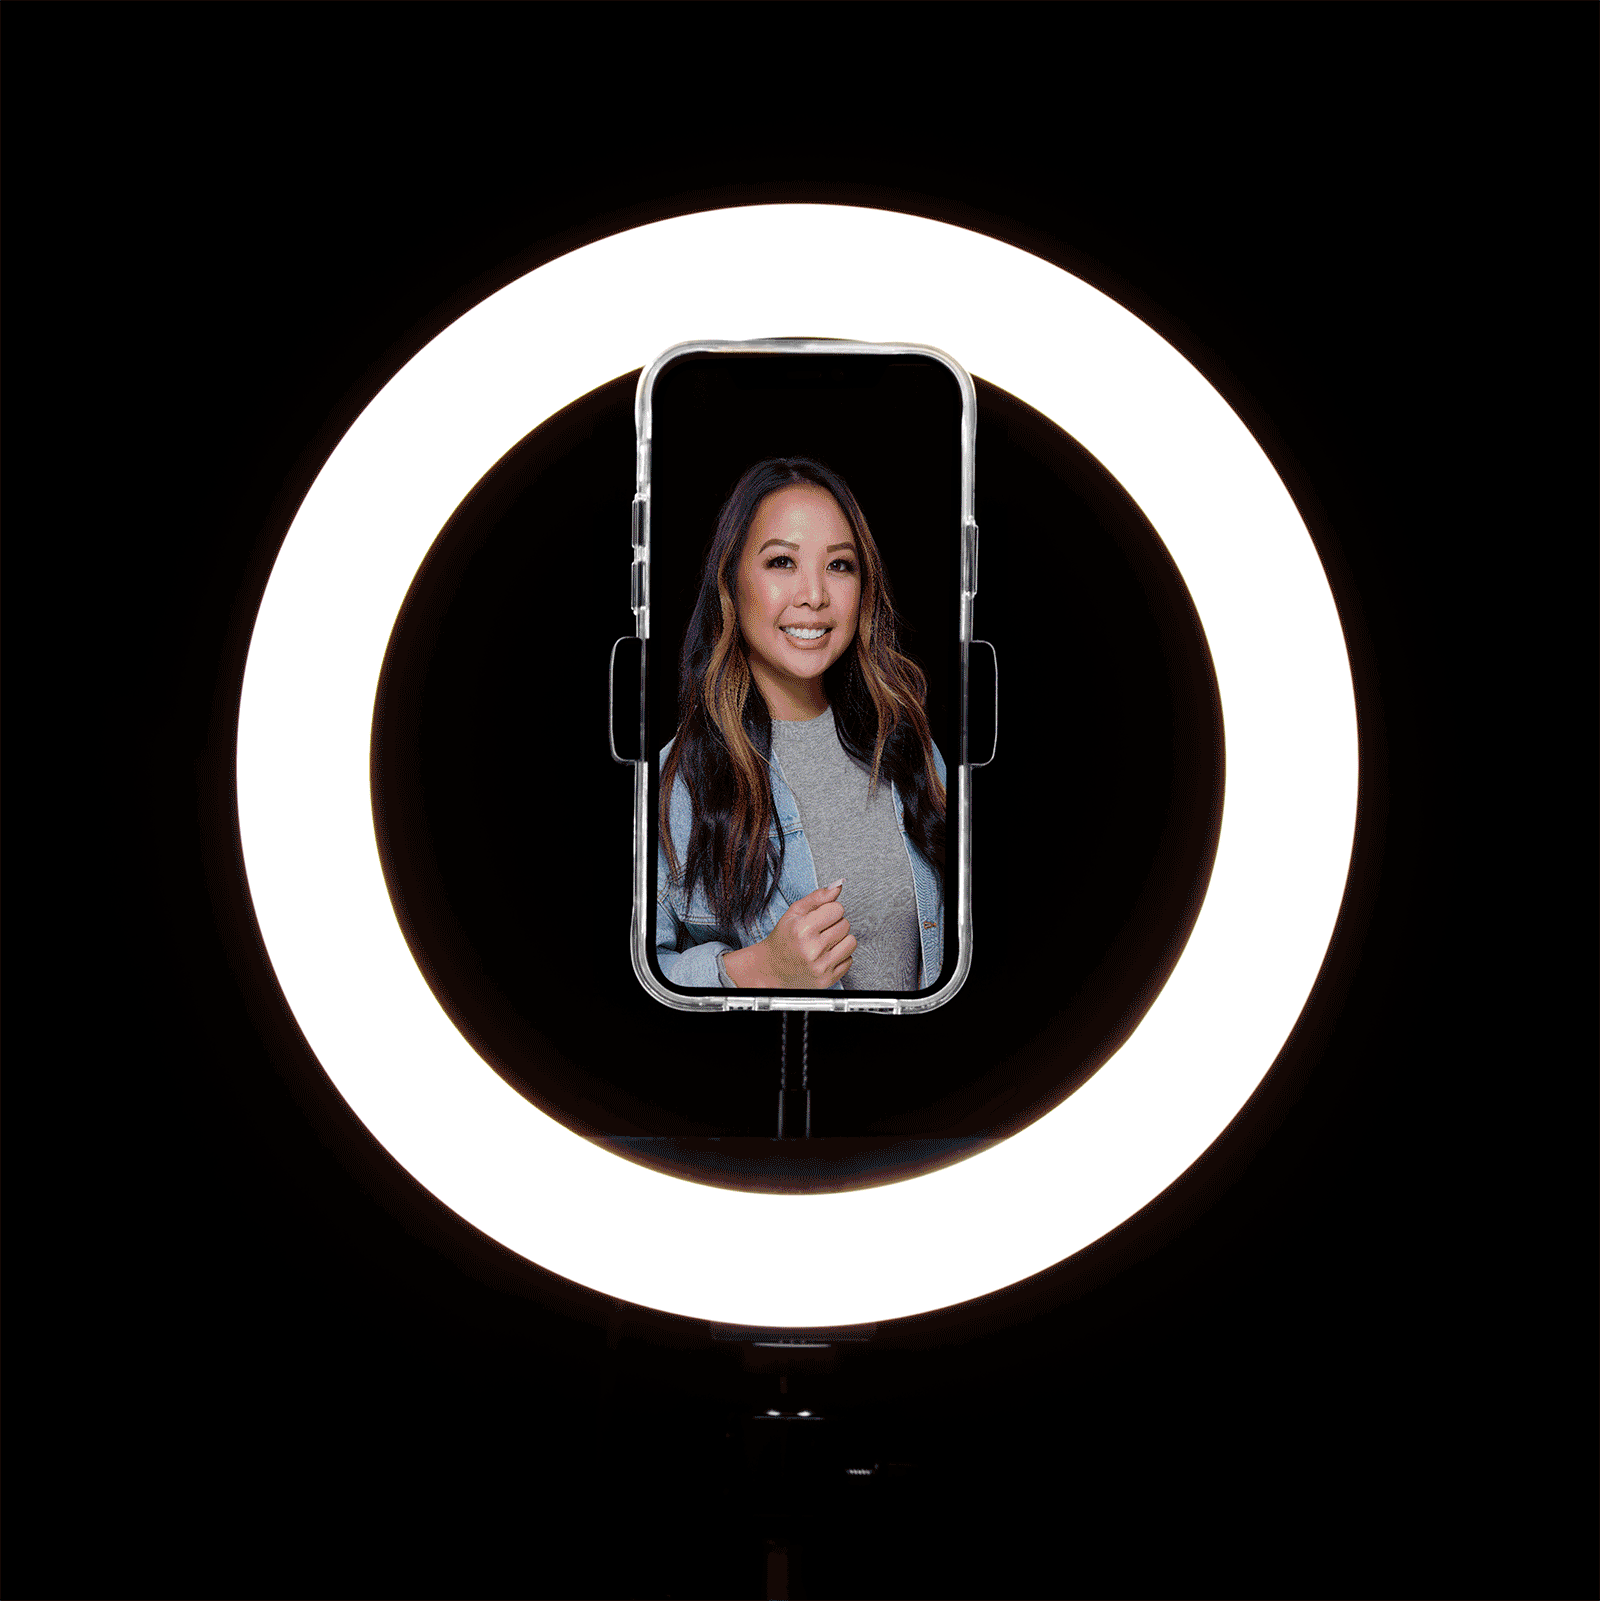 LuMee Studio 18" RGB Ring Light | Universal LED Lighting solution, Selfie Ring Light, 3 Light Modes, 1x Device Holder, Metal Tripod Stand Included, Manual or Bluetooth Operated - Black - SW1hZ2U6MzYxNTAy